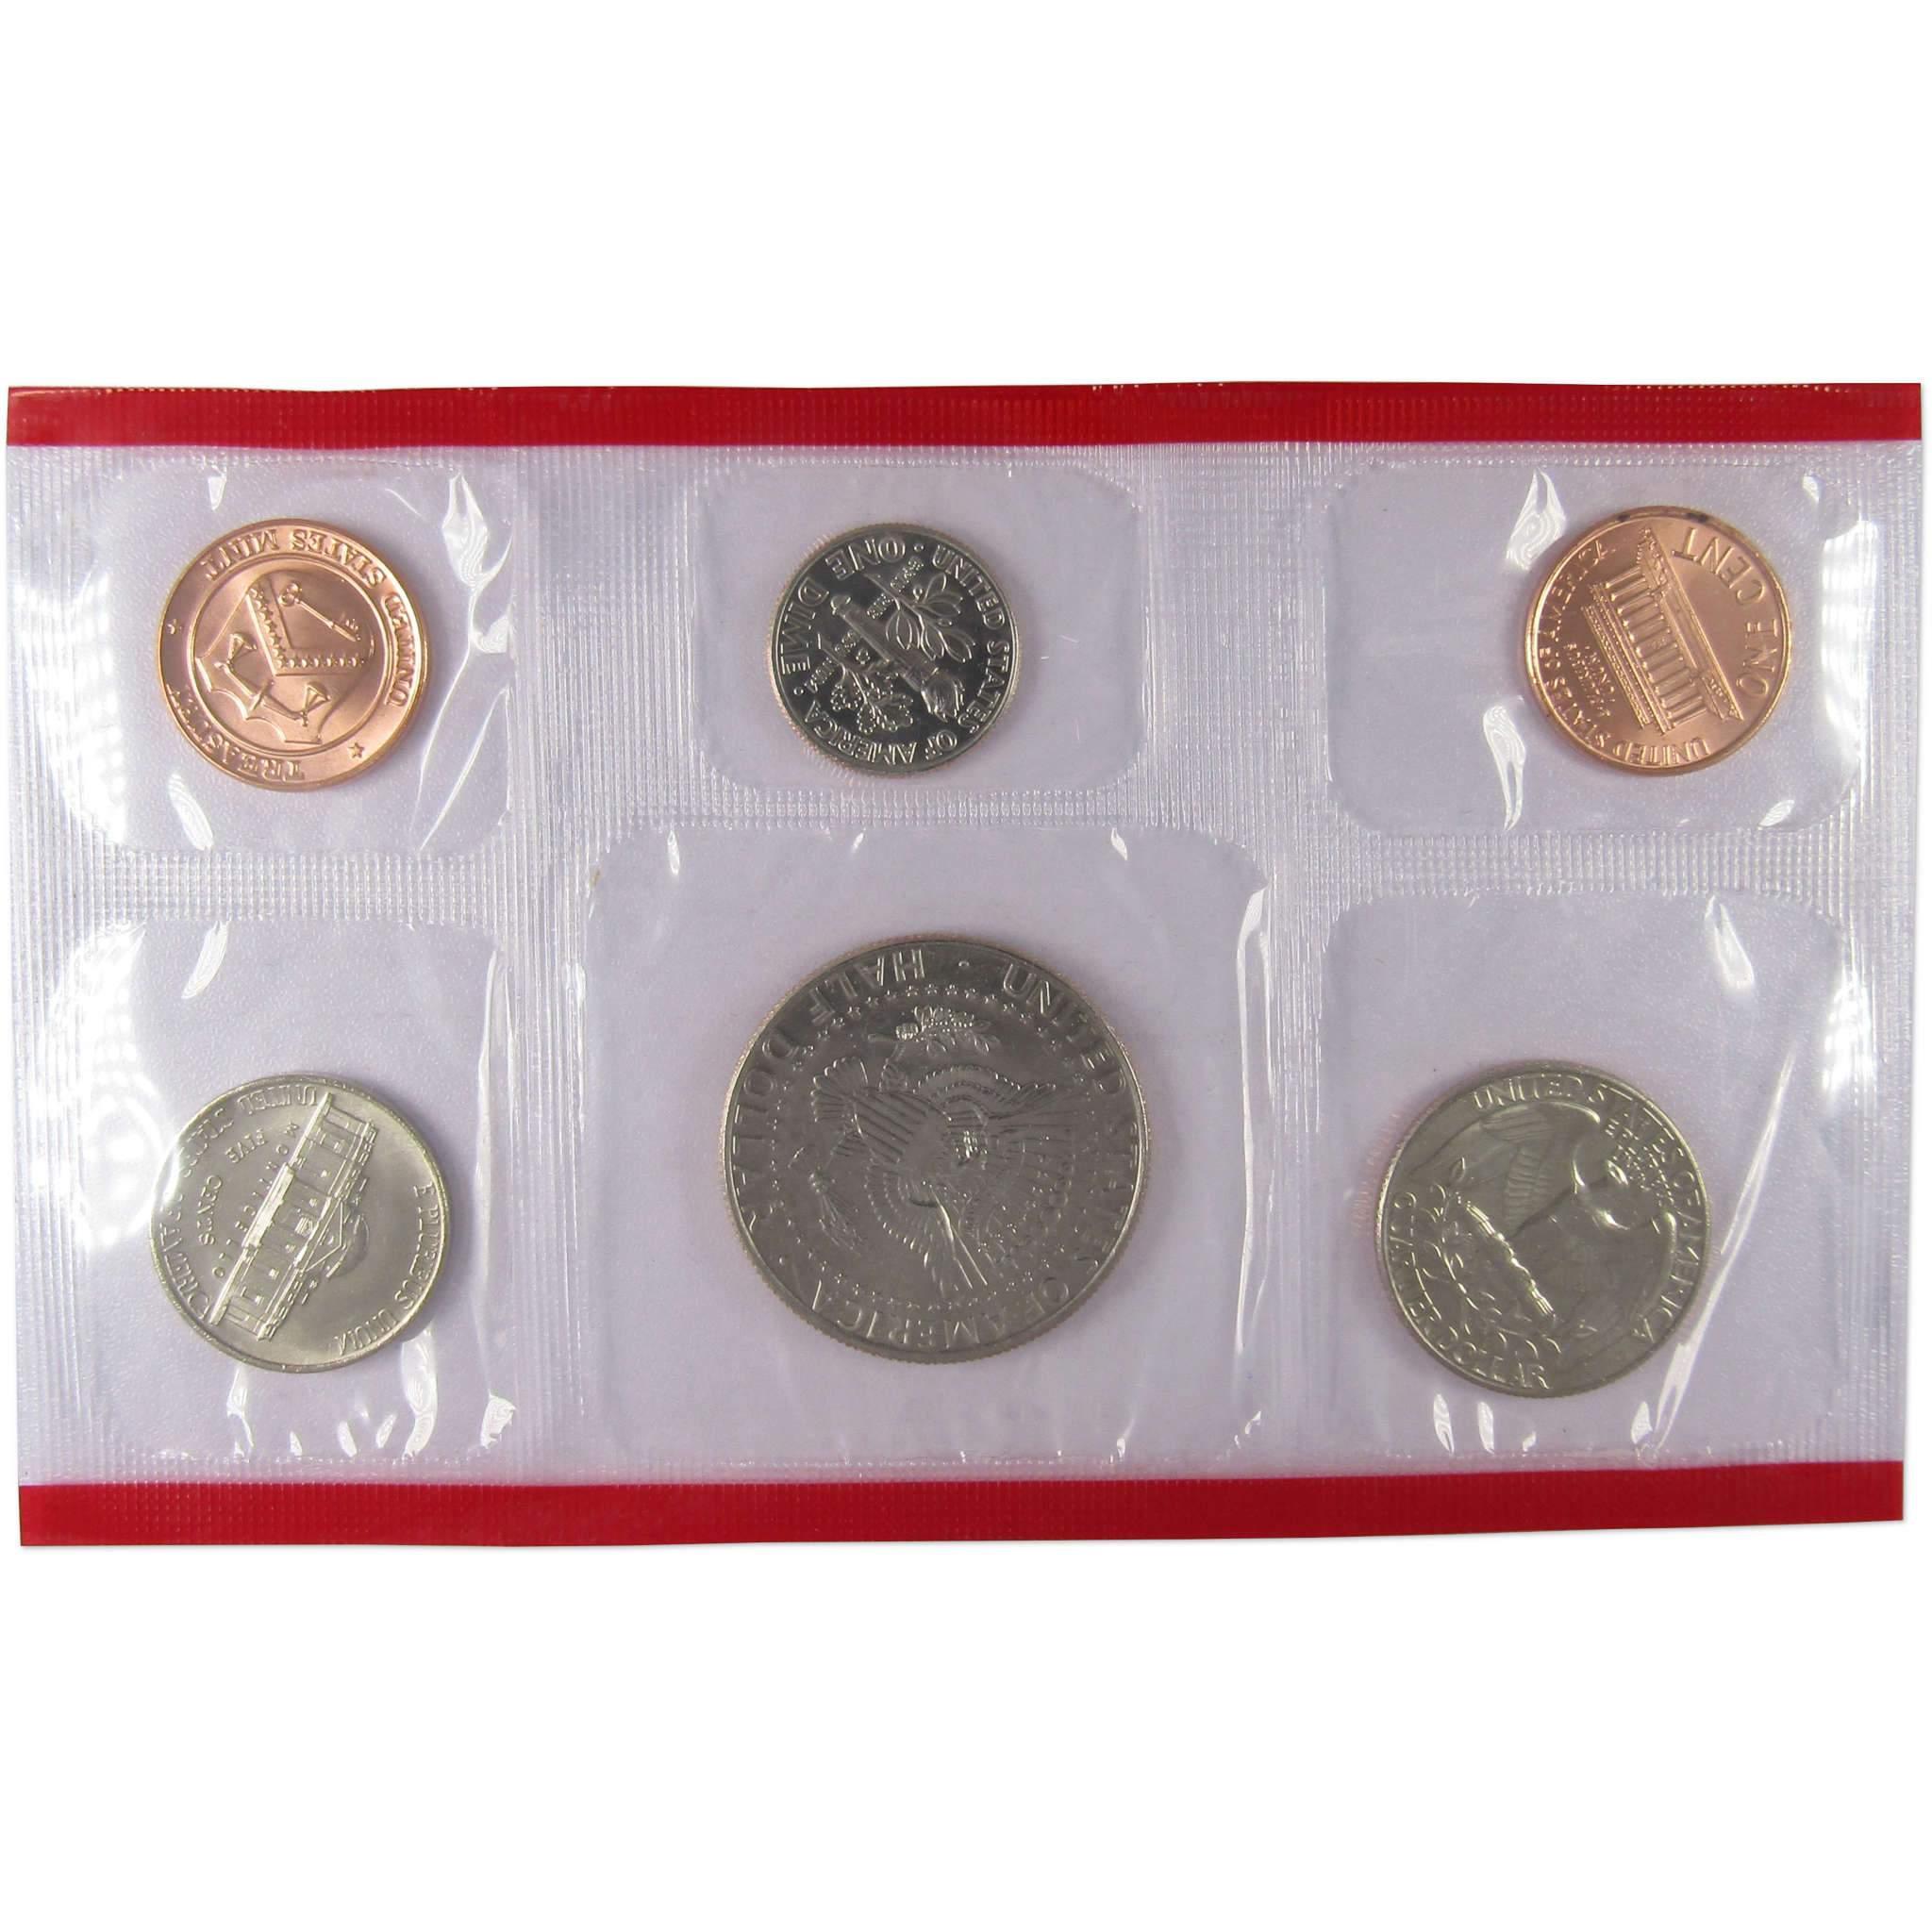 1992 U.S. Mint Set Uncirculated Original Government Packaging OGP Collectible